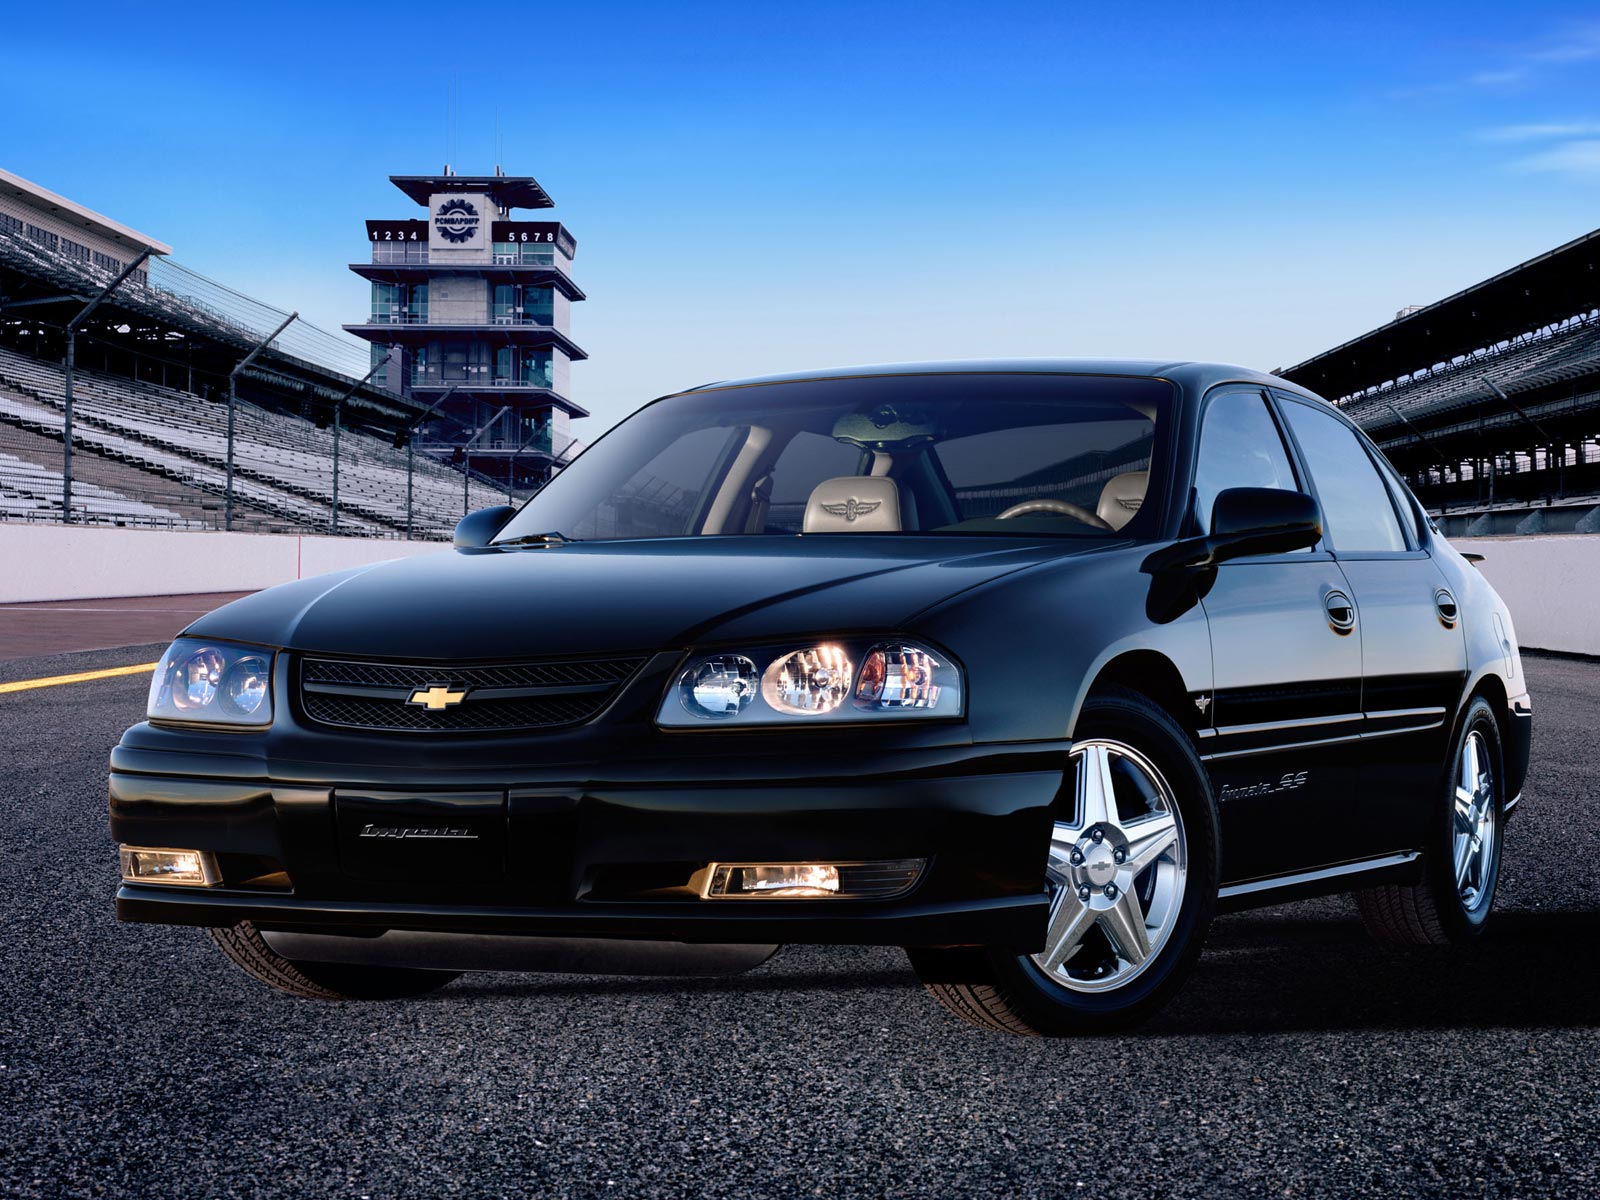 Chevrolet Impala 1990: Review, Amazing Pictures and Images 